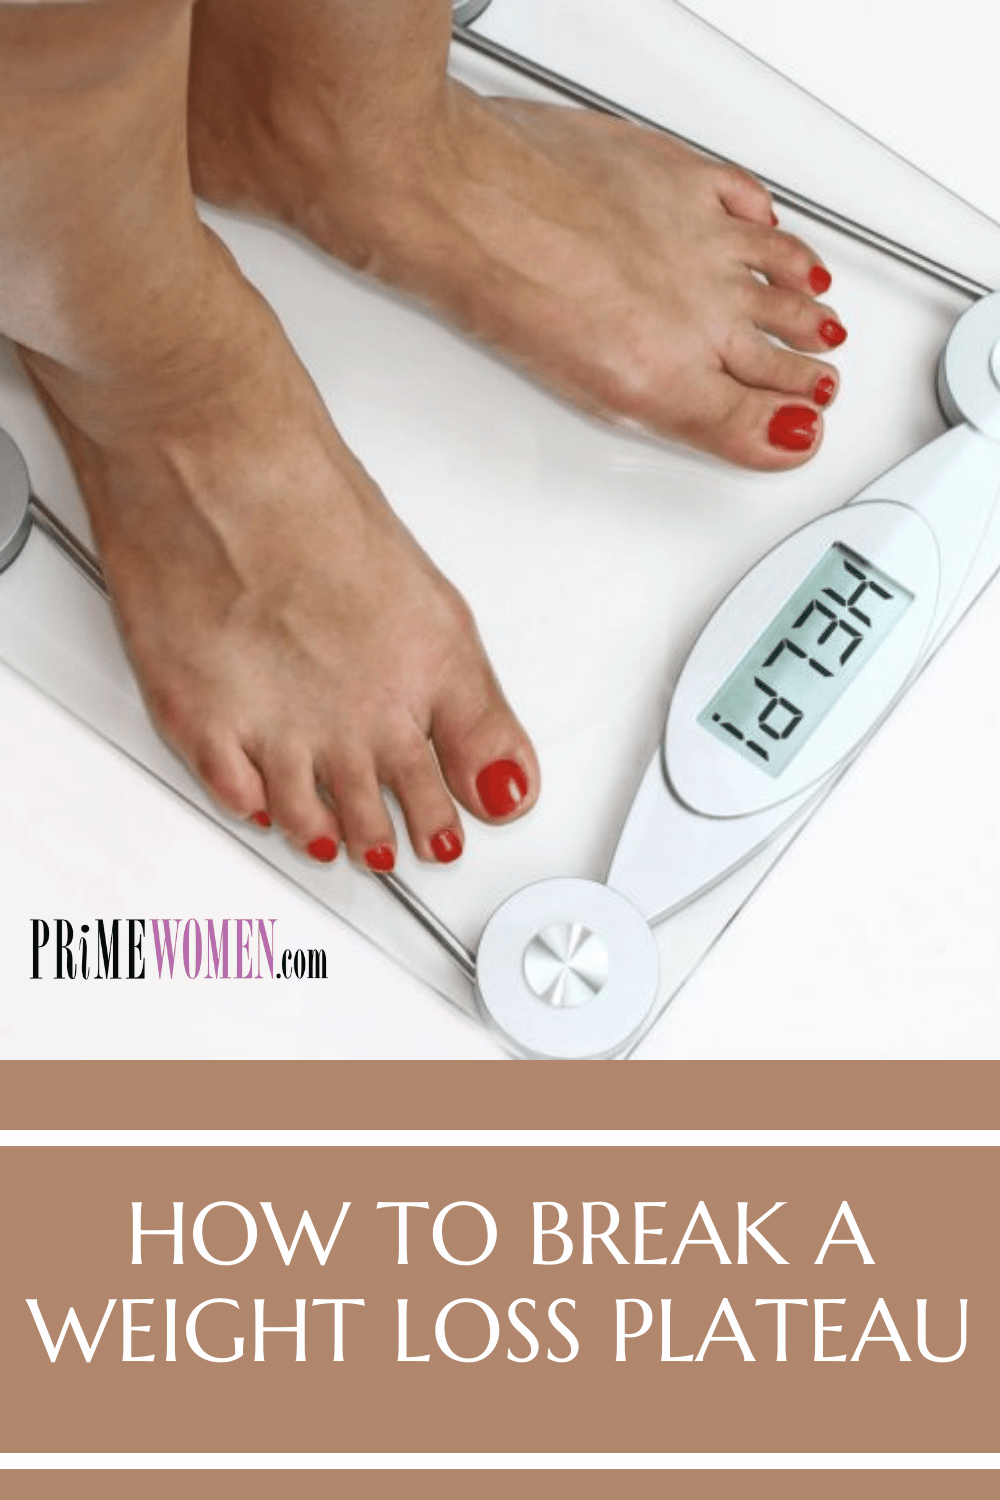 How to break a weight loss plateau